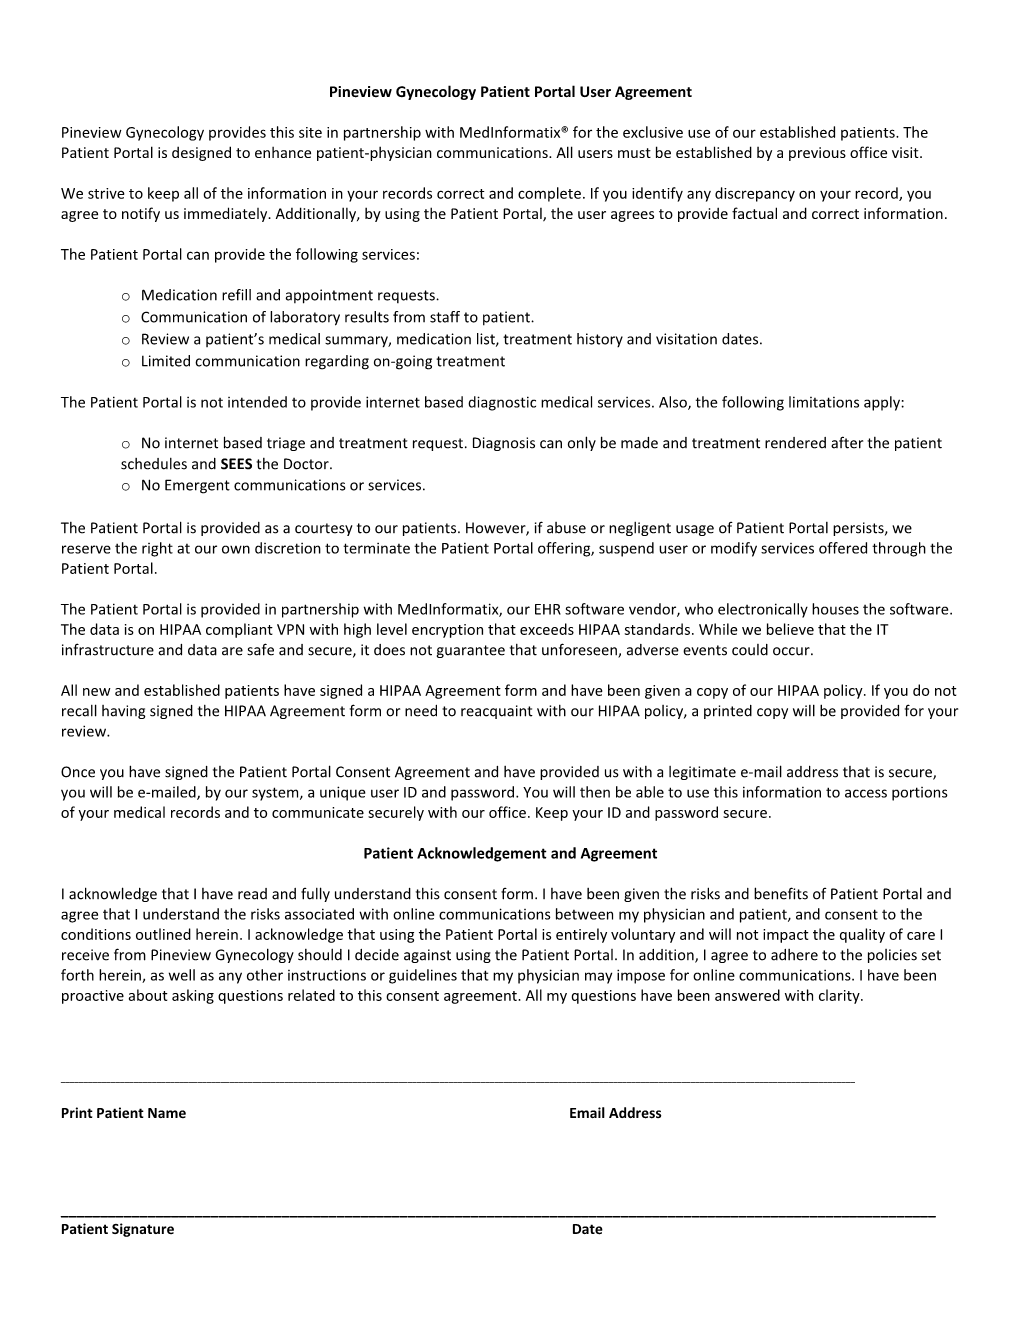 Pineview Gynecology Patient Portal User Agreement